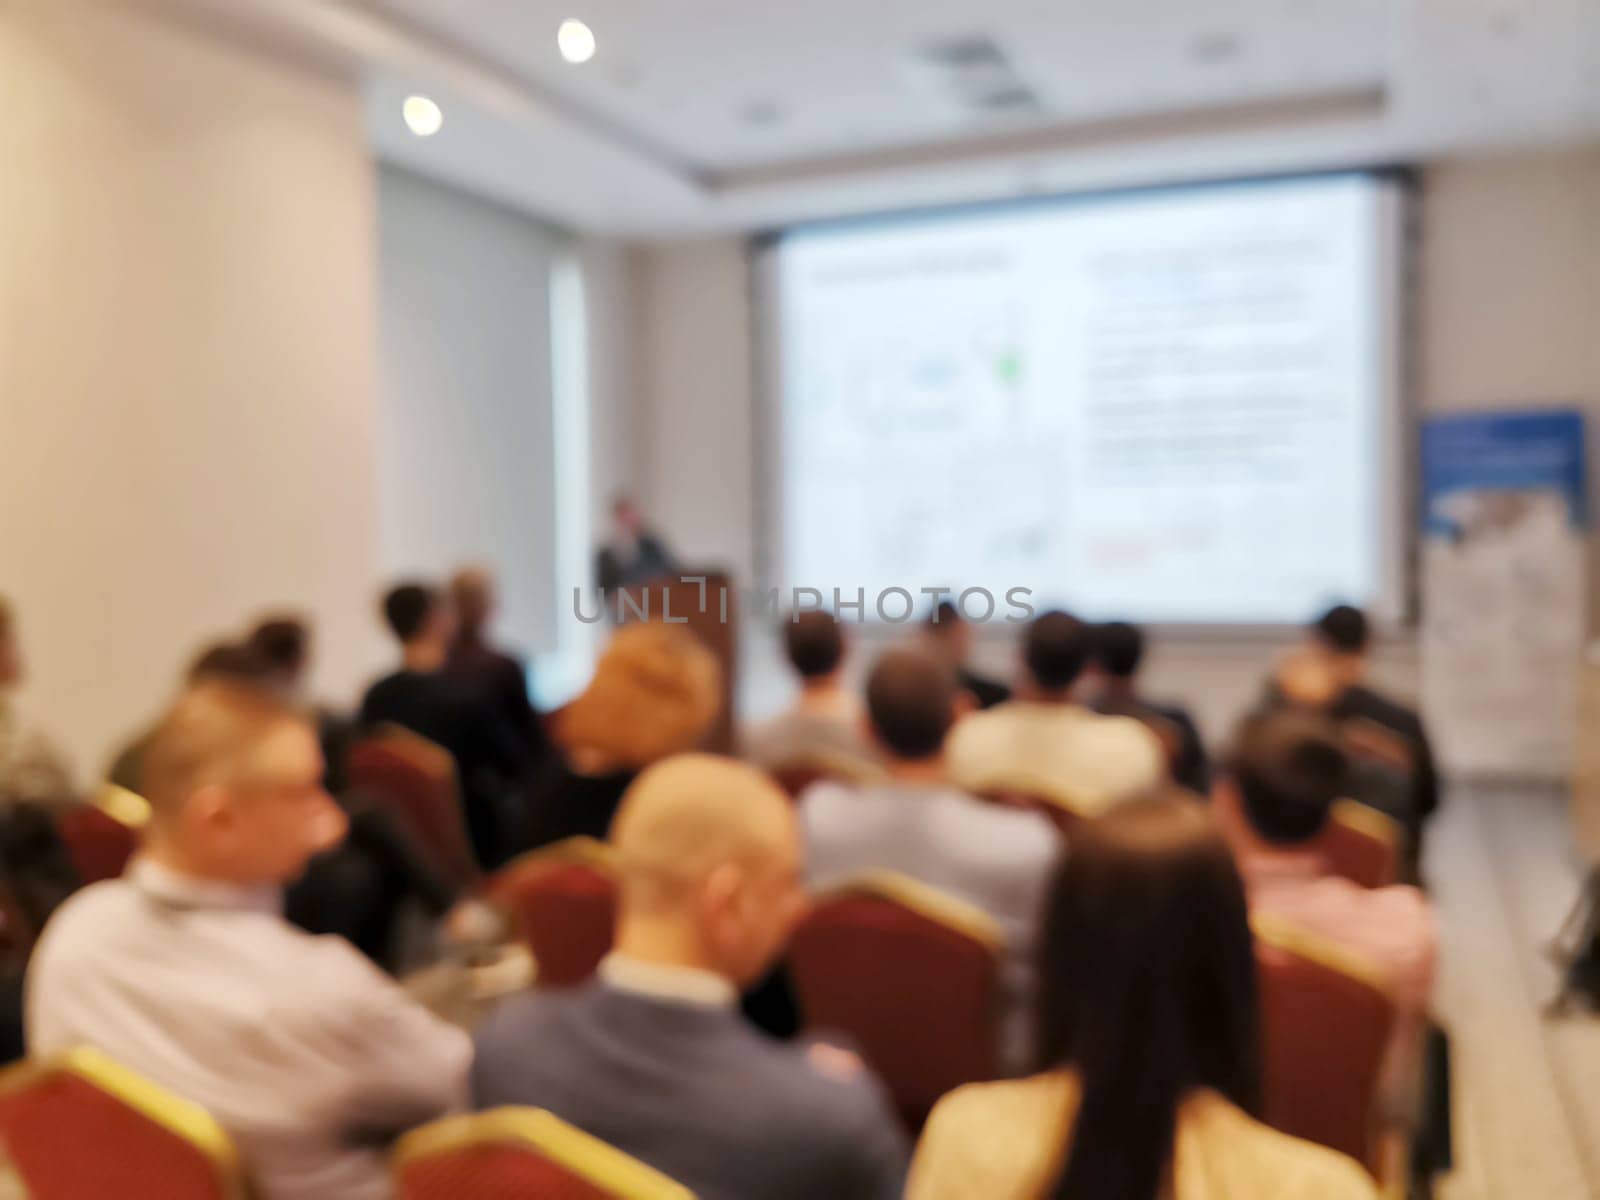 Blurred background image of audience in a business conference or seminar. Audience listens to the lecturer at the conference in auditorium.